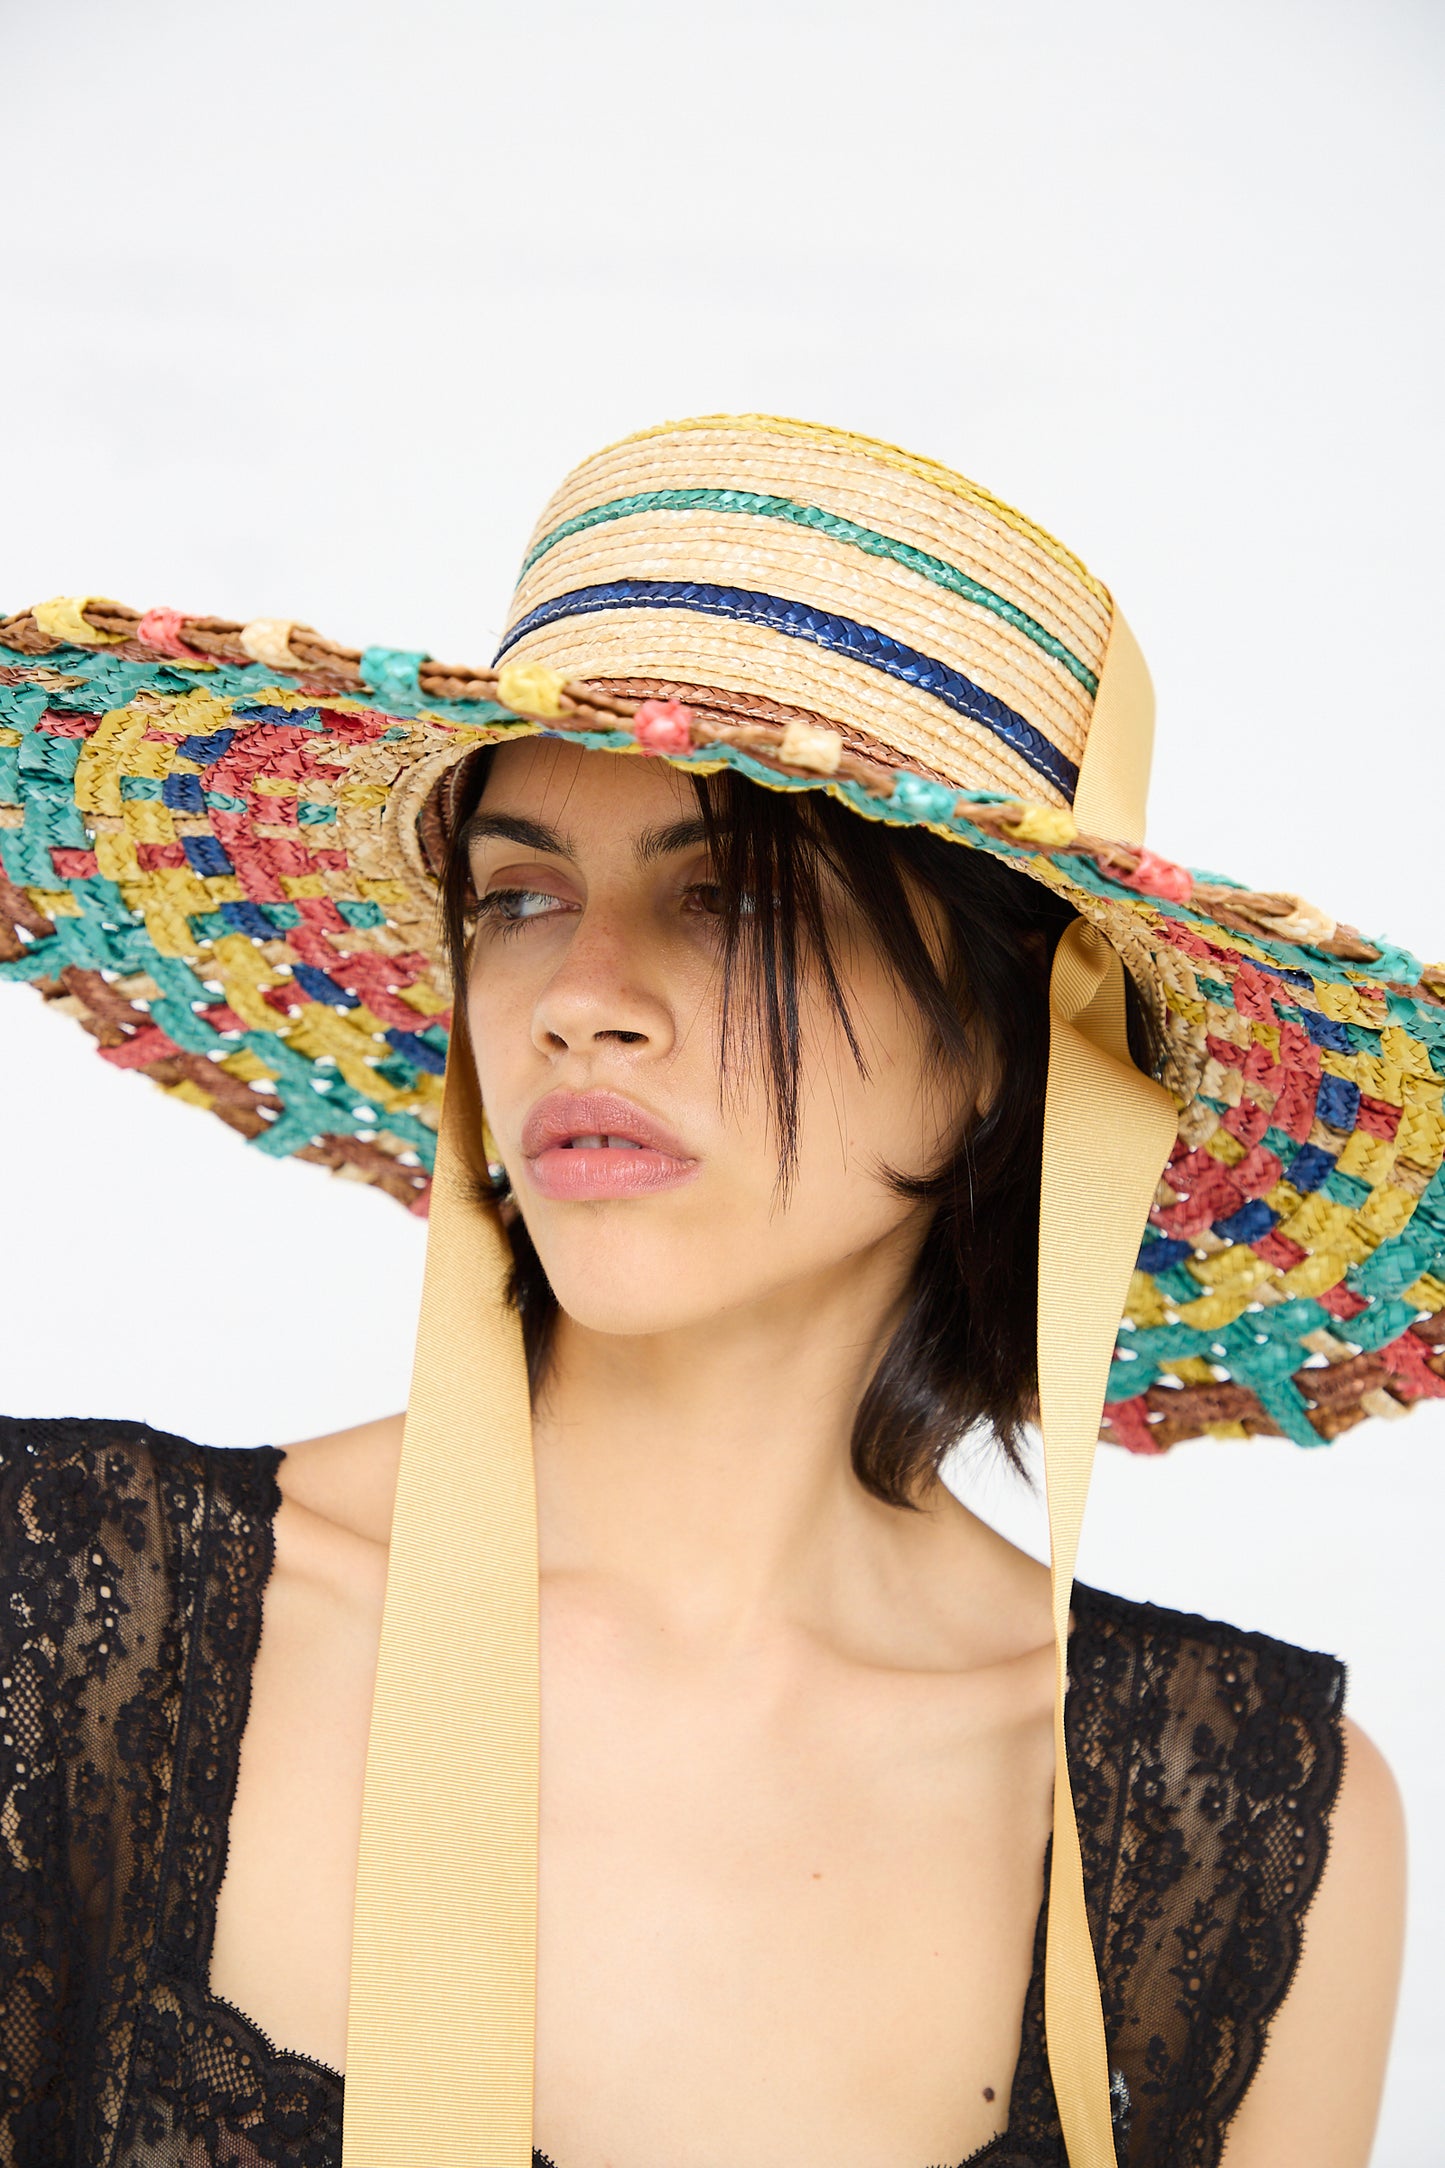 A woman wearing a colorful, wide-brimmed Zahati Straw Cuchi Tris-Tras No. 94 Hat with Laces with a braided straw design and beige ribbon, dressed in a sheer black lace top, looks to the side.